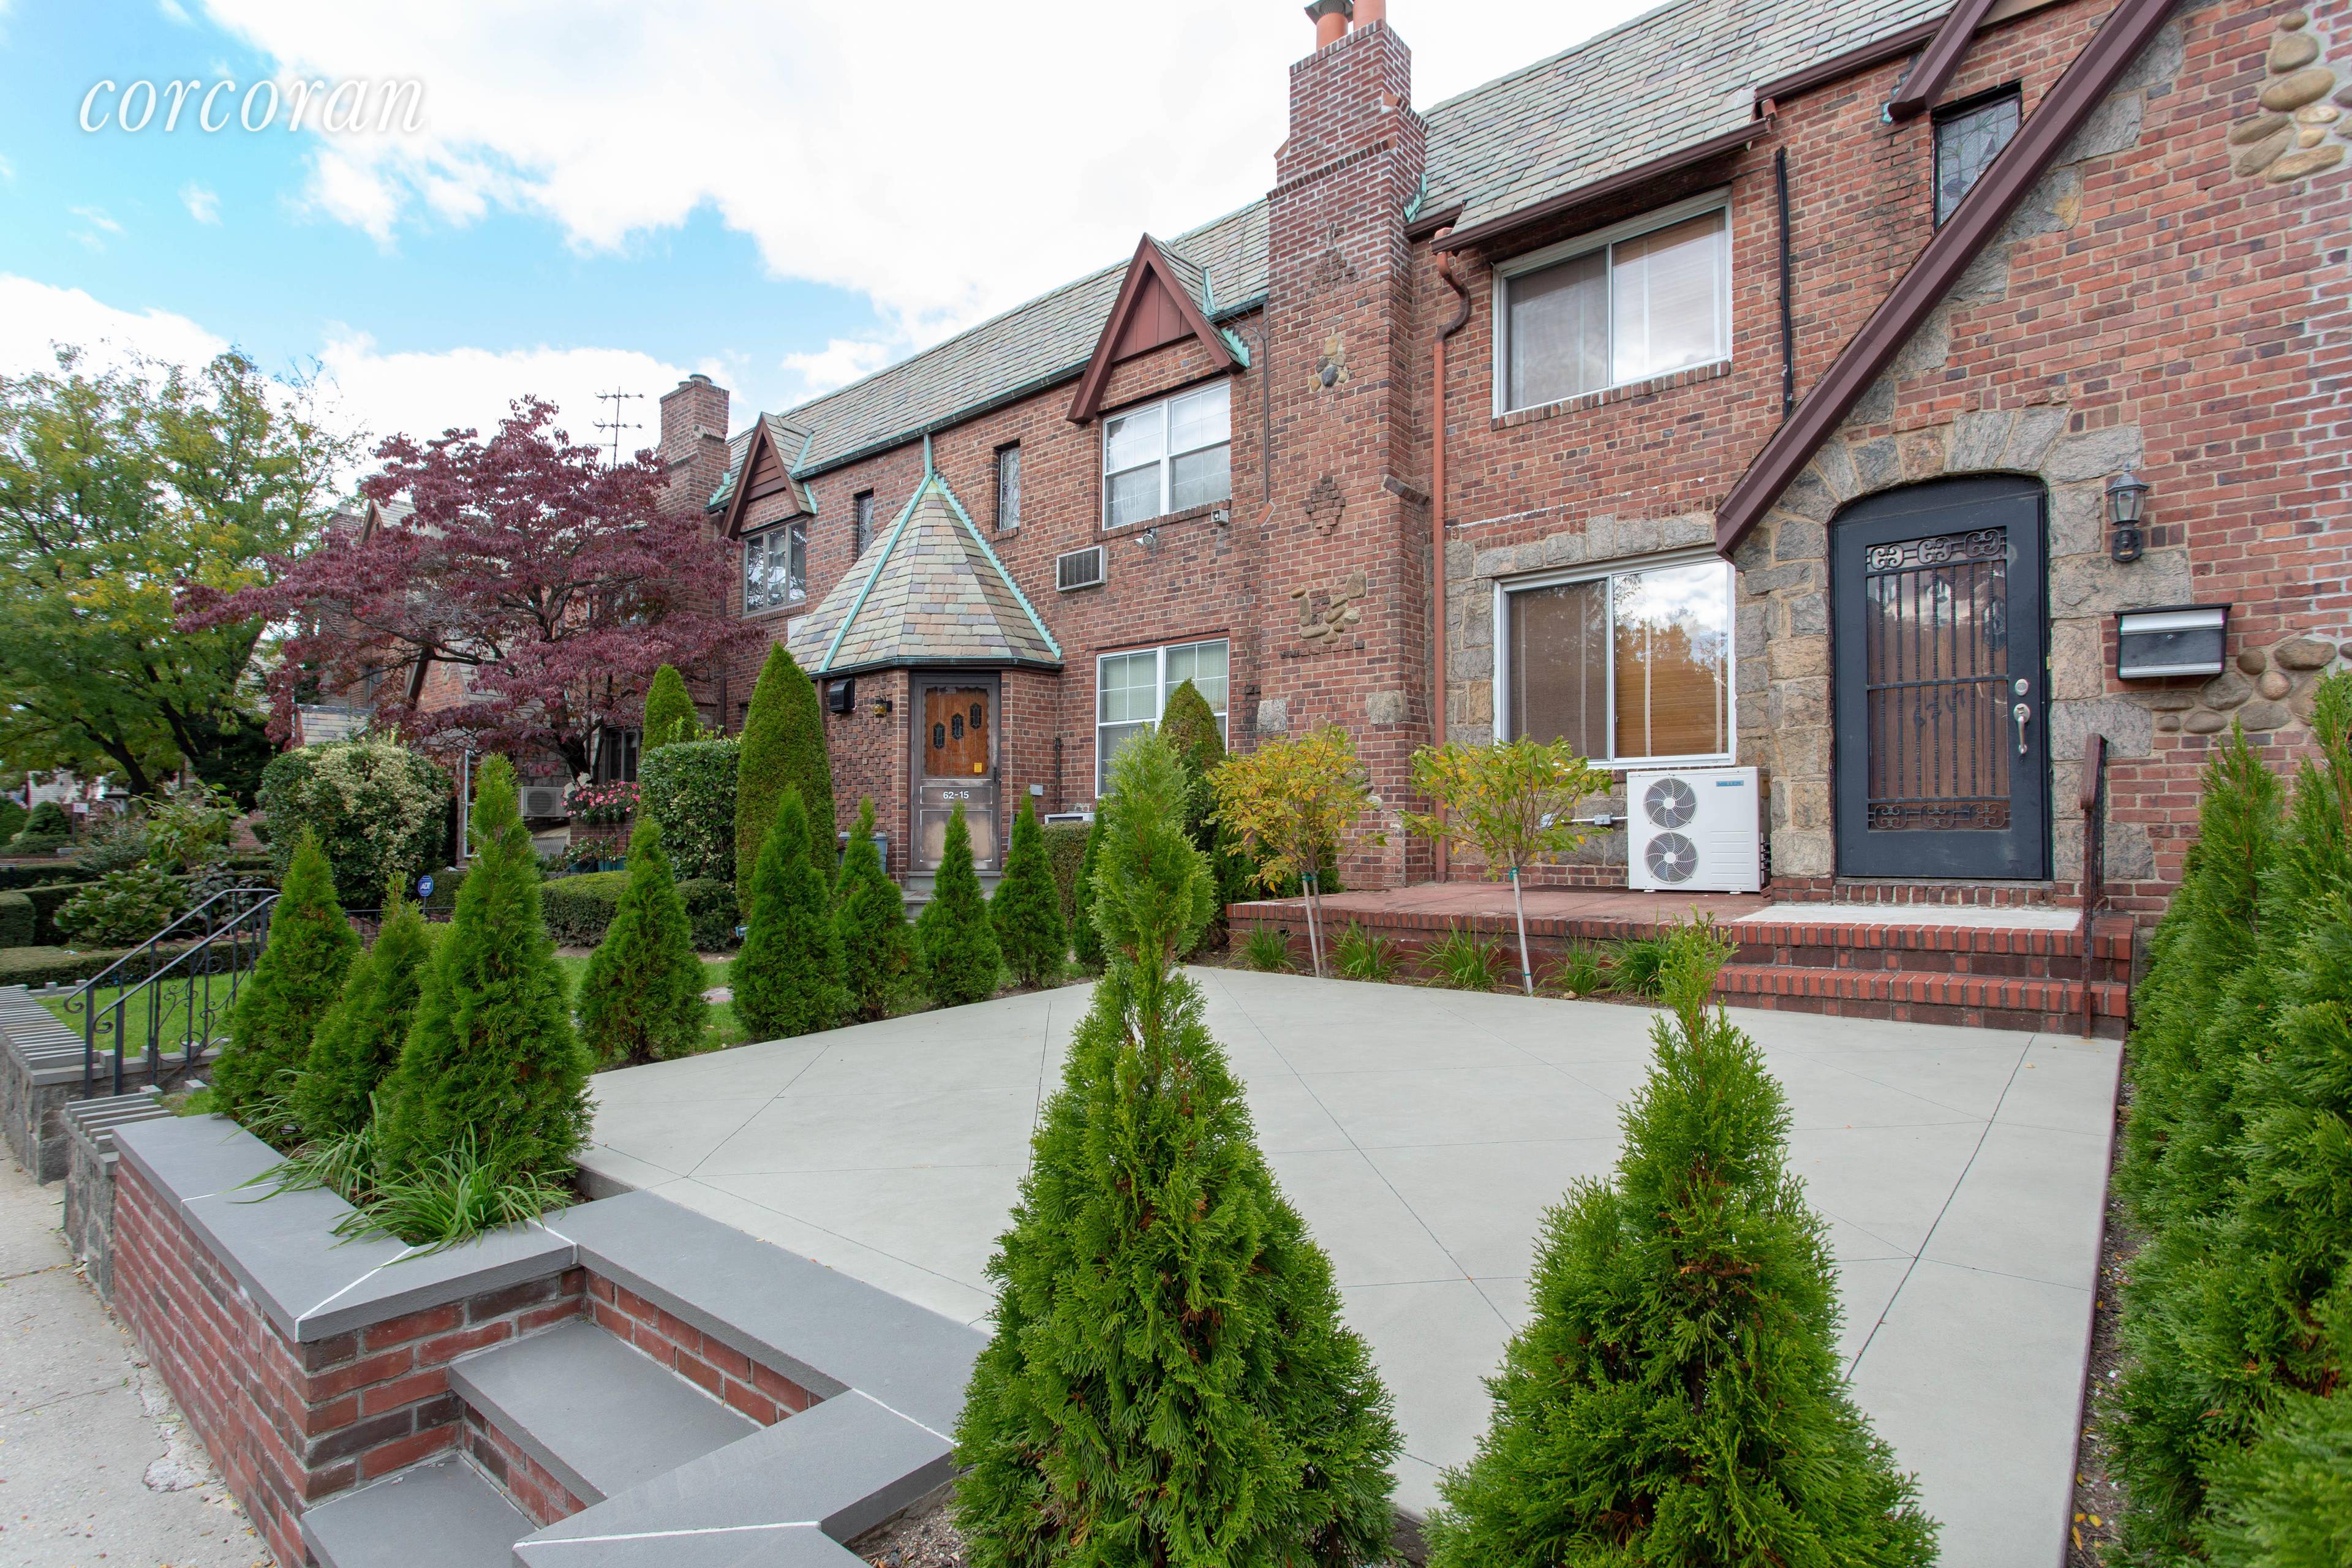 OFFER ACCEPTED ! 62 17 Alderton Street is a charming, tudor style house in the thriving section of Rego Park, Queens.